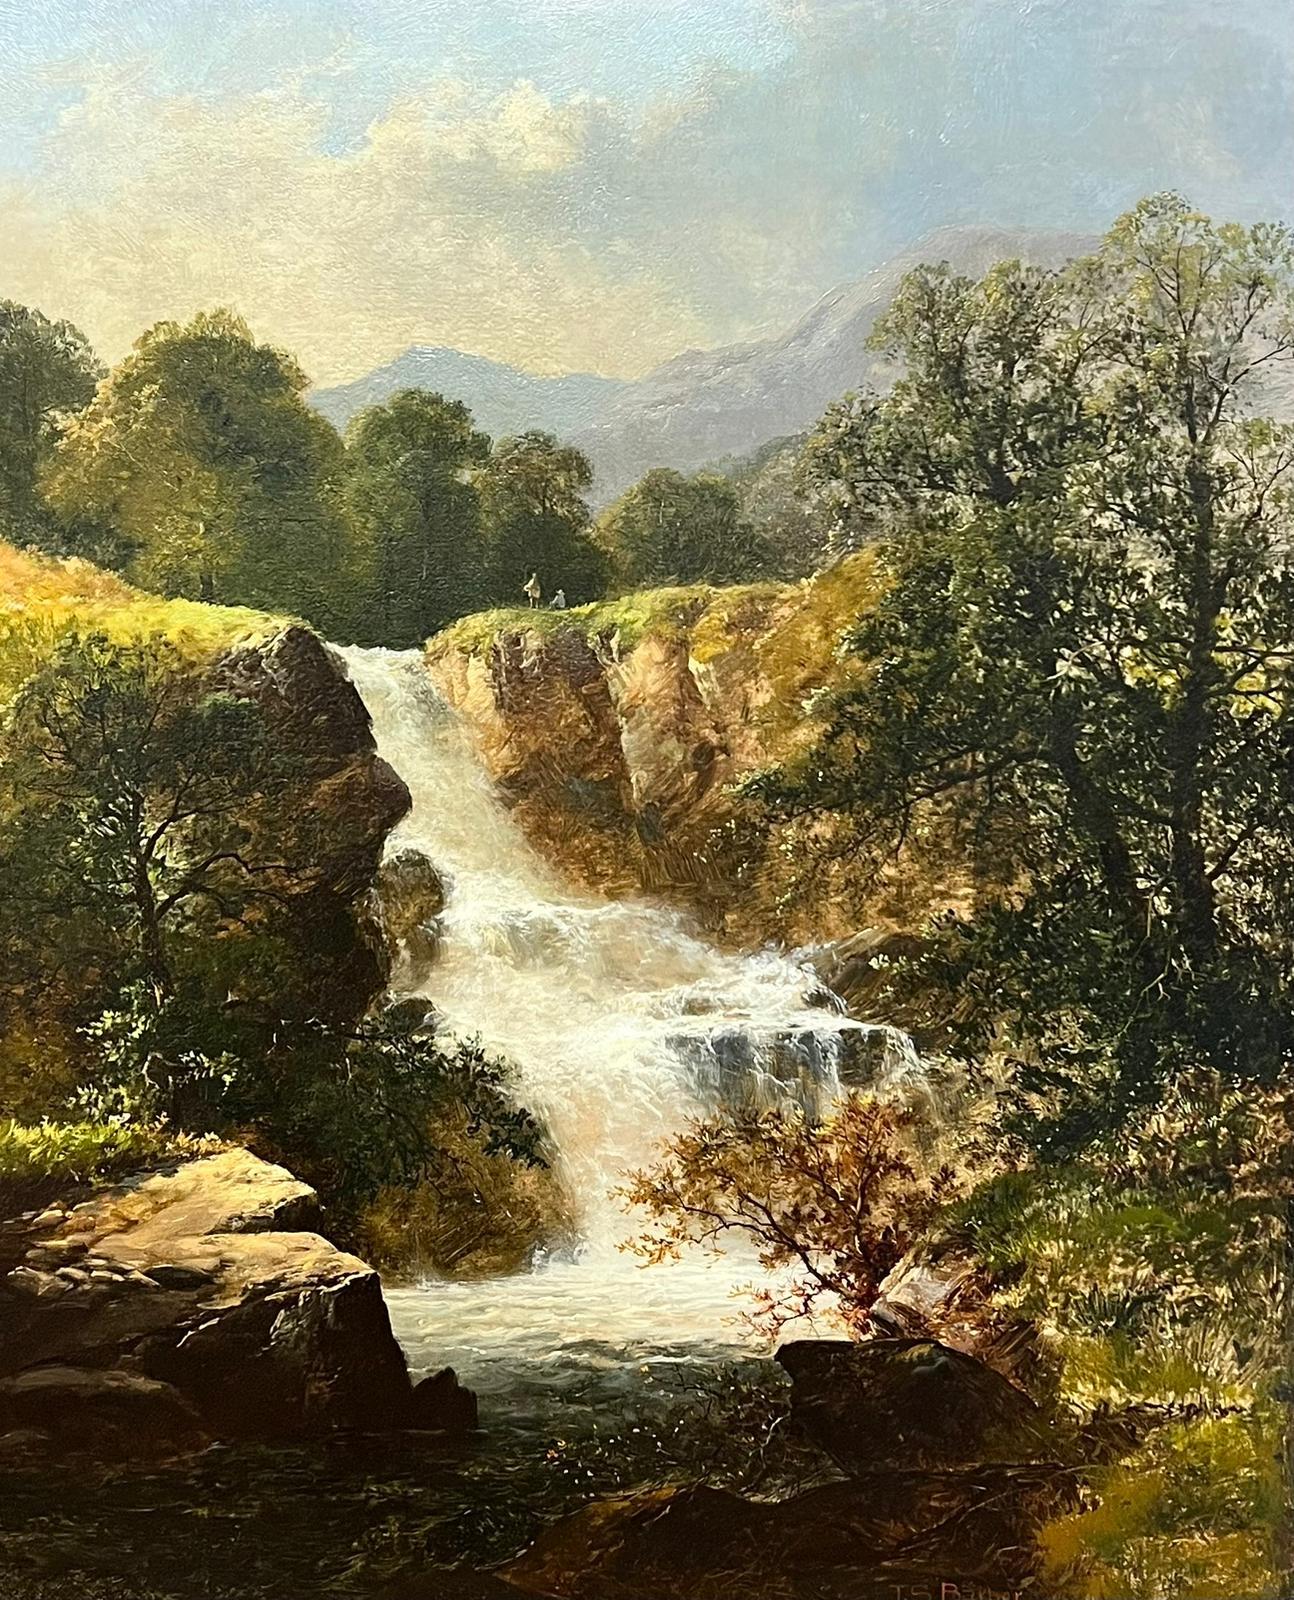 British School, 19th century
Figures by Waterfall, Capel Curig, North Wales
oil painting on canvas, framed
framed: 27 x 23 inches
canvas: 22 x 17 inches
provenance: private collection, UK
condition: very good and sound condition